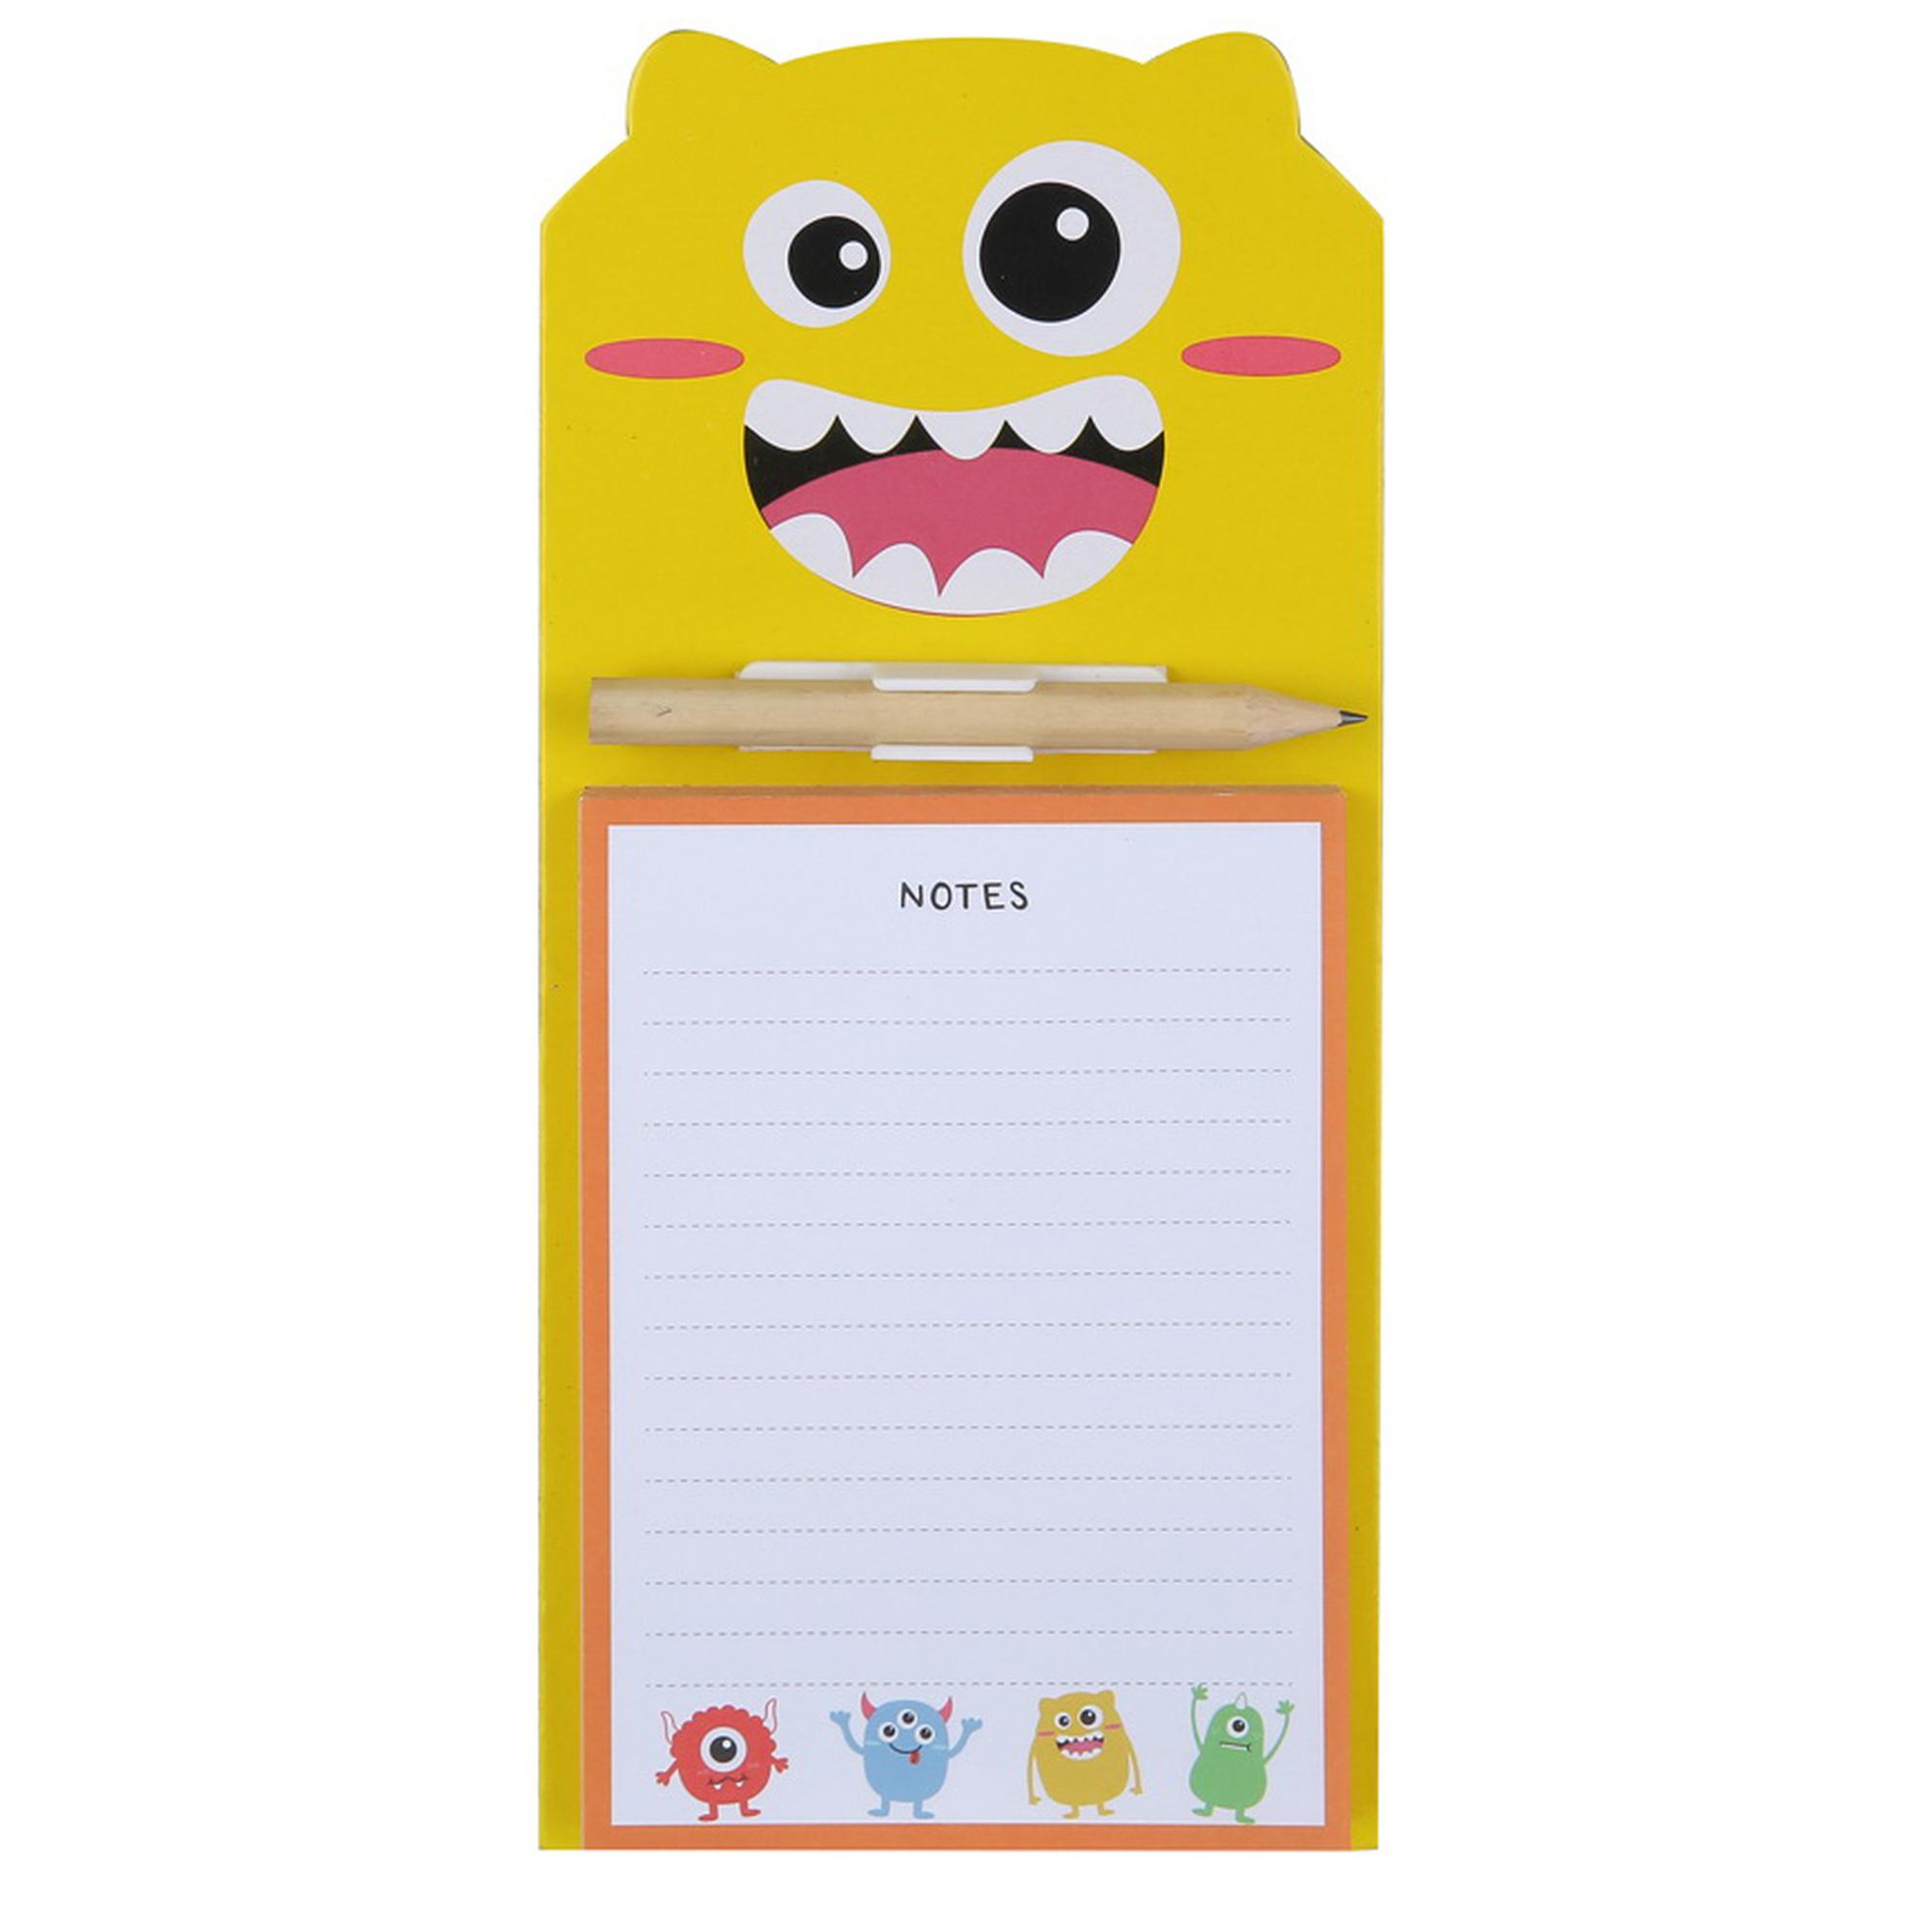 SET OF STICKY NOTES AND PENCIL, CONTAINS: 1 STICKY NOTE, 80*120MM, 1 MINI PENCIL HB - 780-8513480